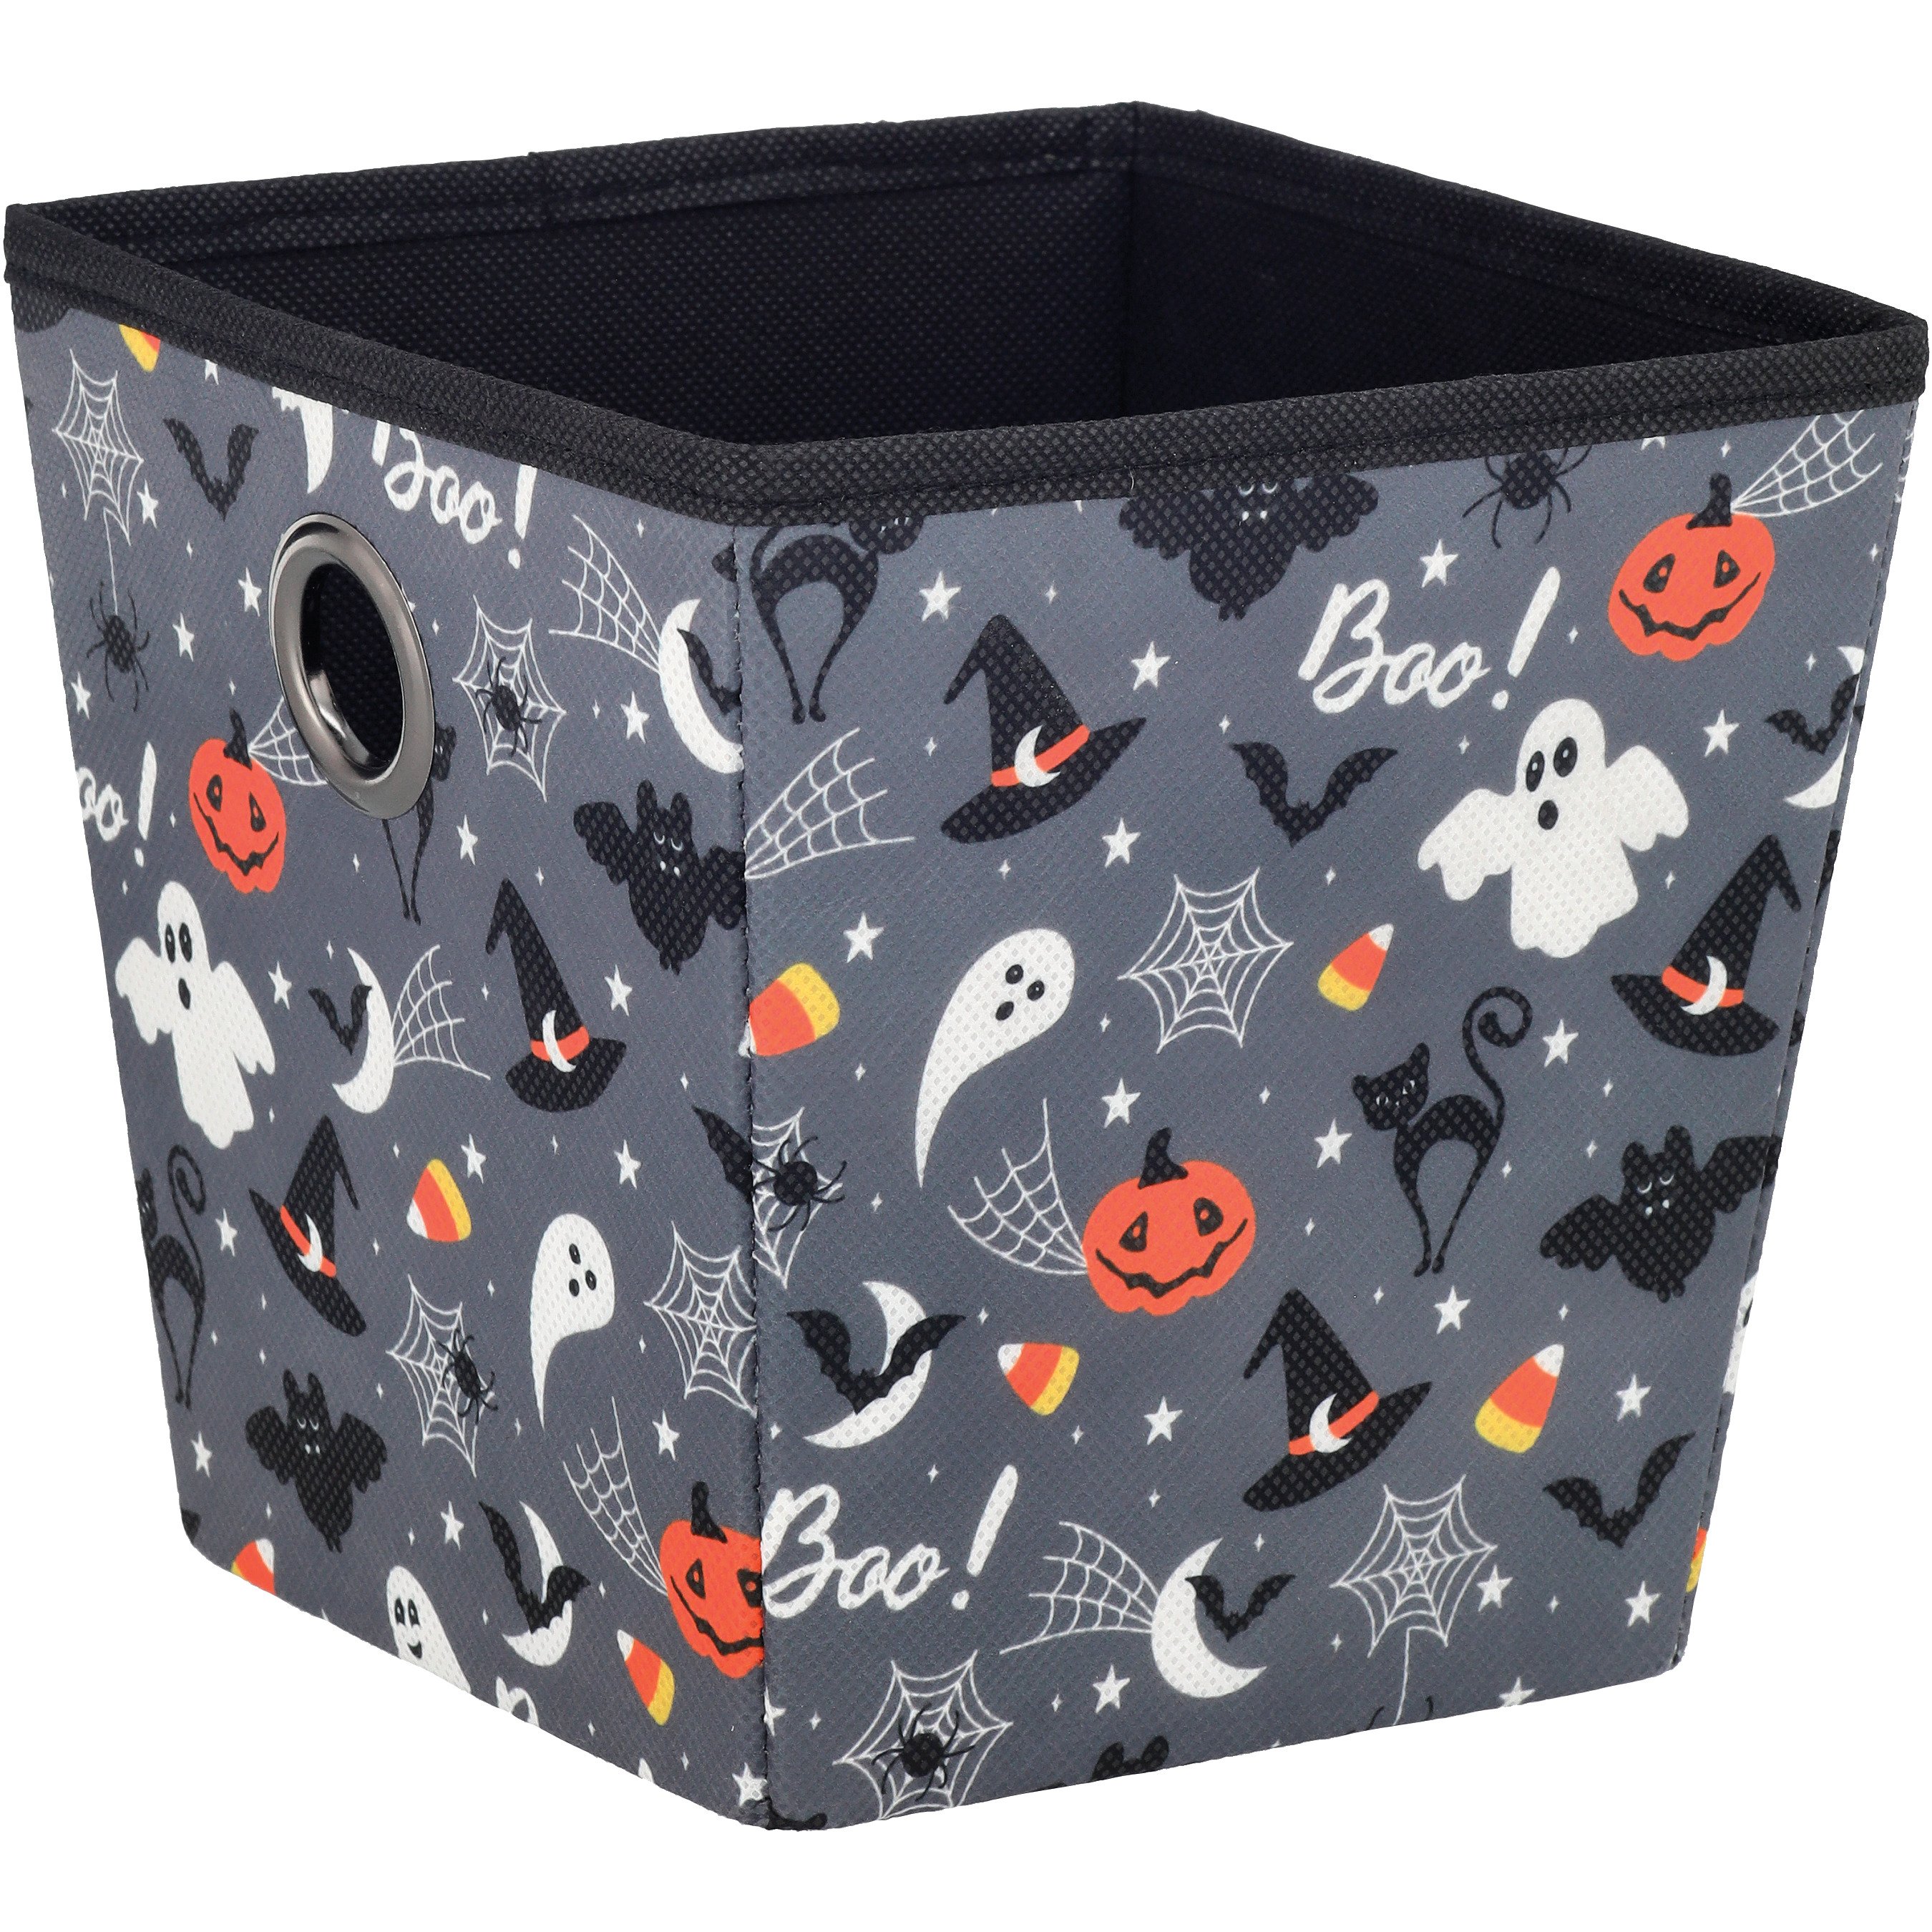 Halloween, Container Decal, Bat Decal, Storage Basket Sticker, Storage Bin  Decal, Halloween Storage, Organization, Labels, Fall Decor 